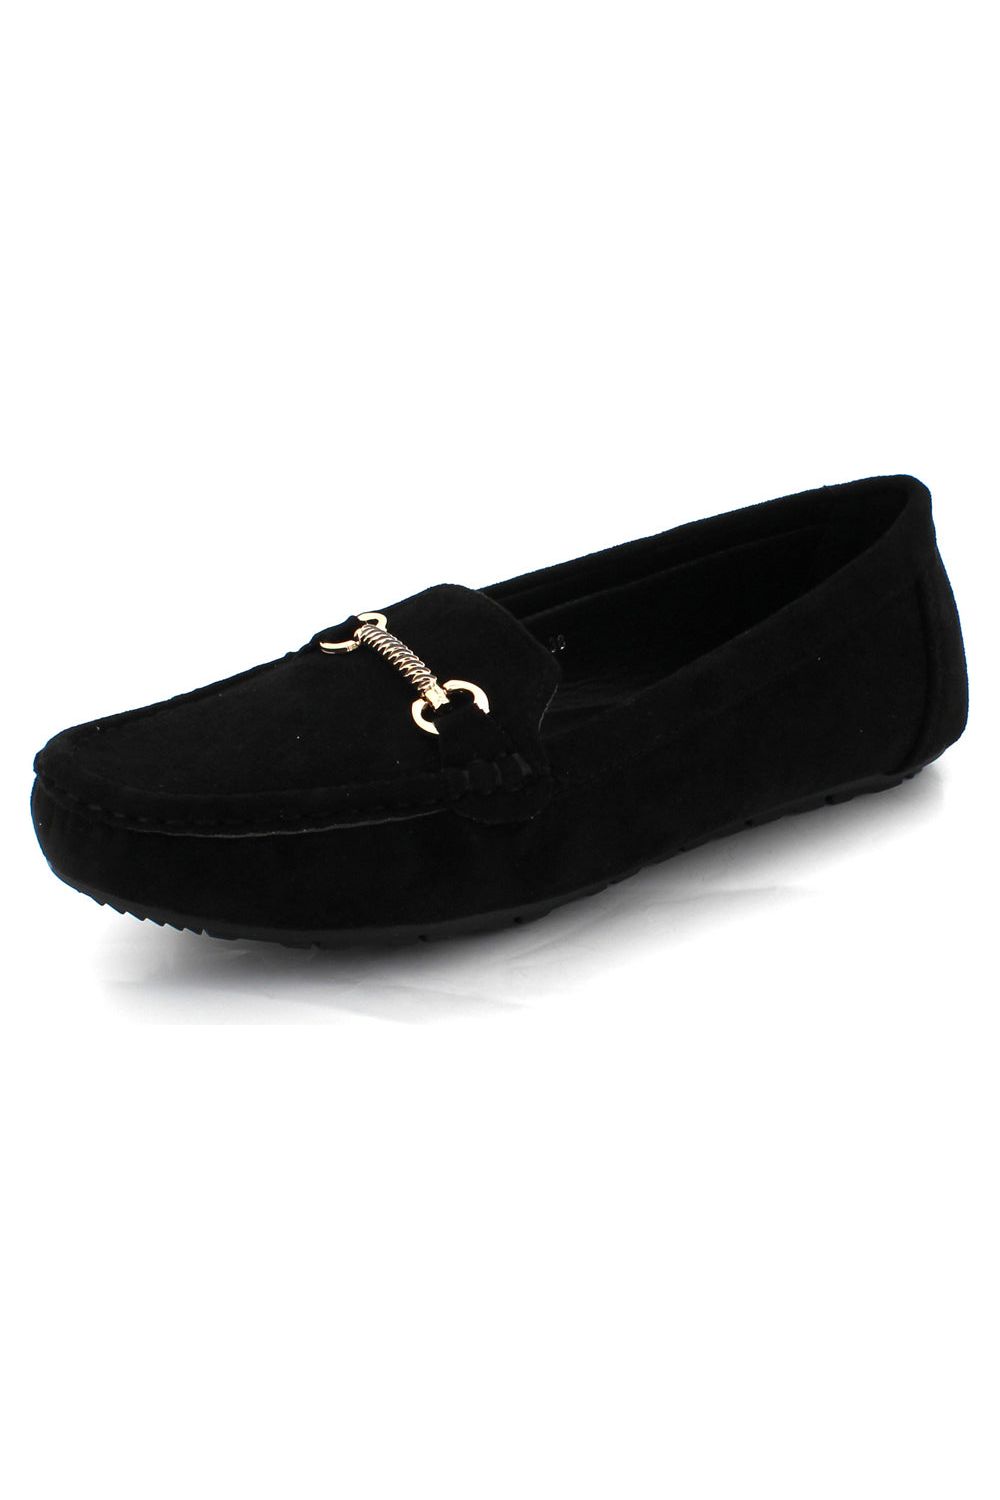 Comfort Casual Everyday Office Work Moccasins Loafer Closed Toe L8085